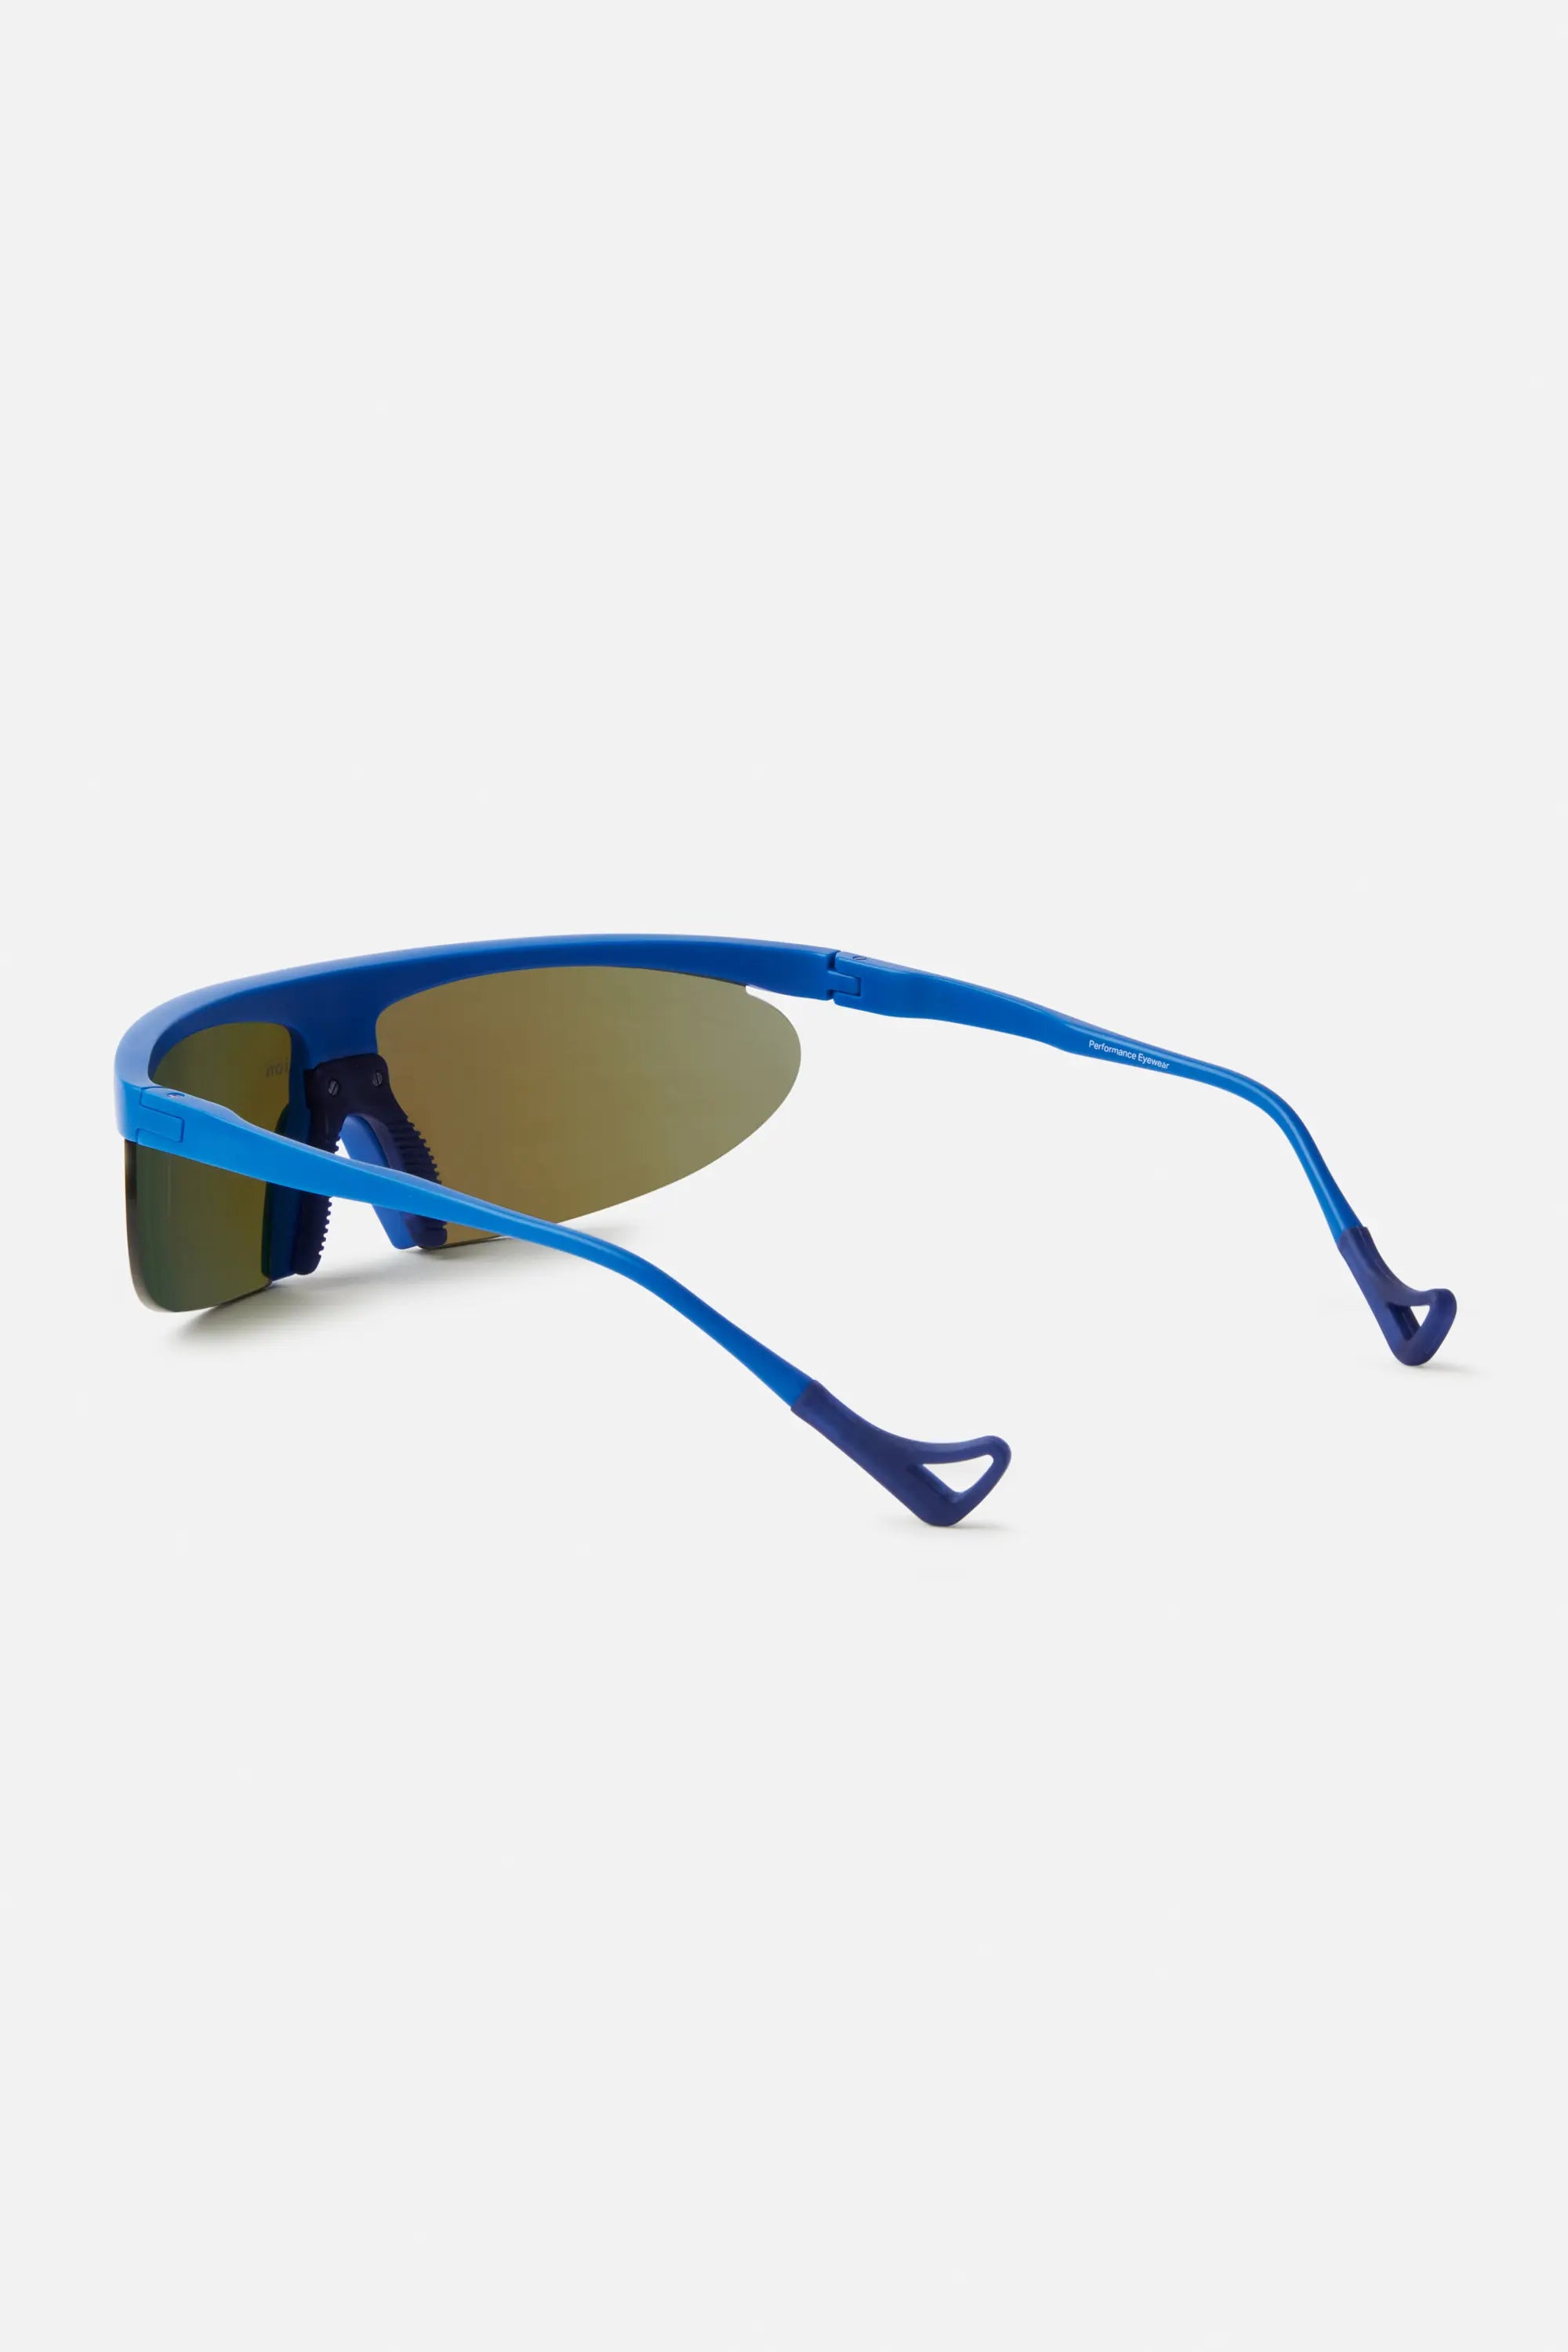 The Best Sport Sunglasses (Koharu Eclipse) From District Vision